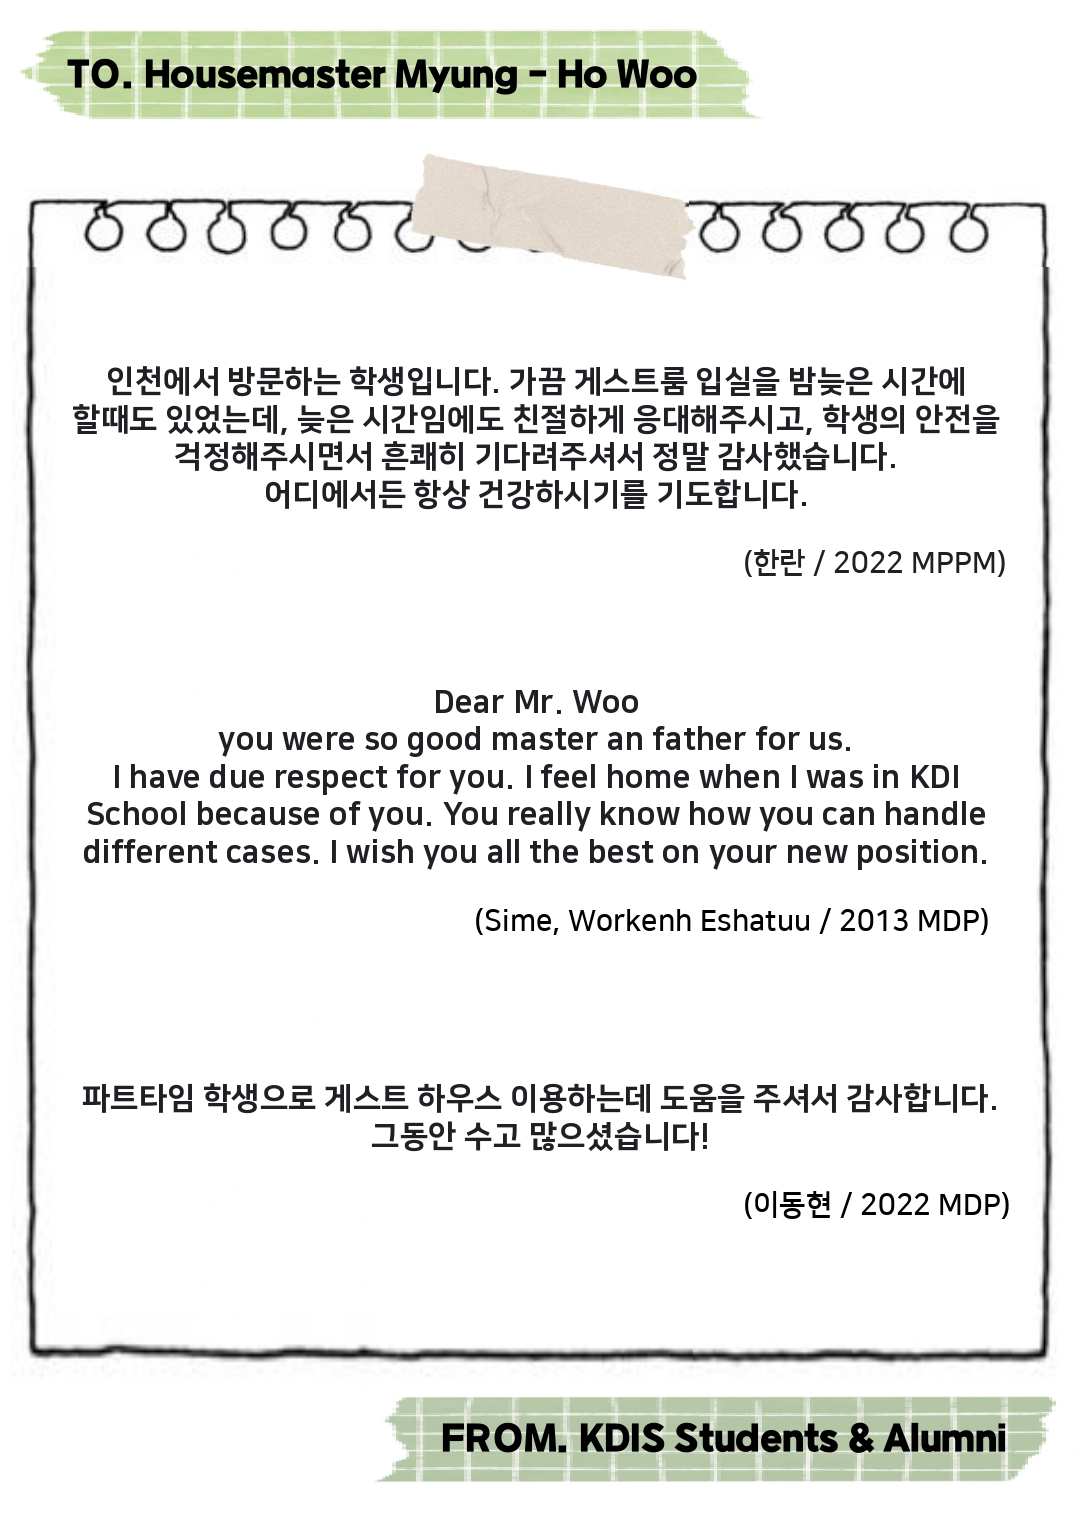 Thank you Housemaster Myung-ho Woo -Messages from KDIS Students and Alumni 사진5